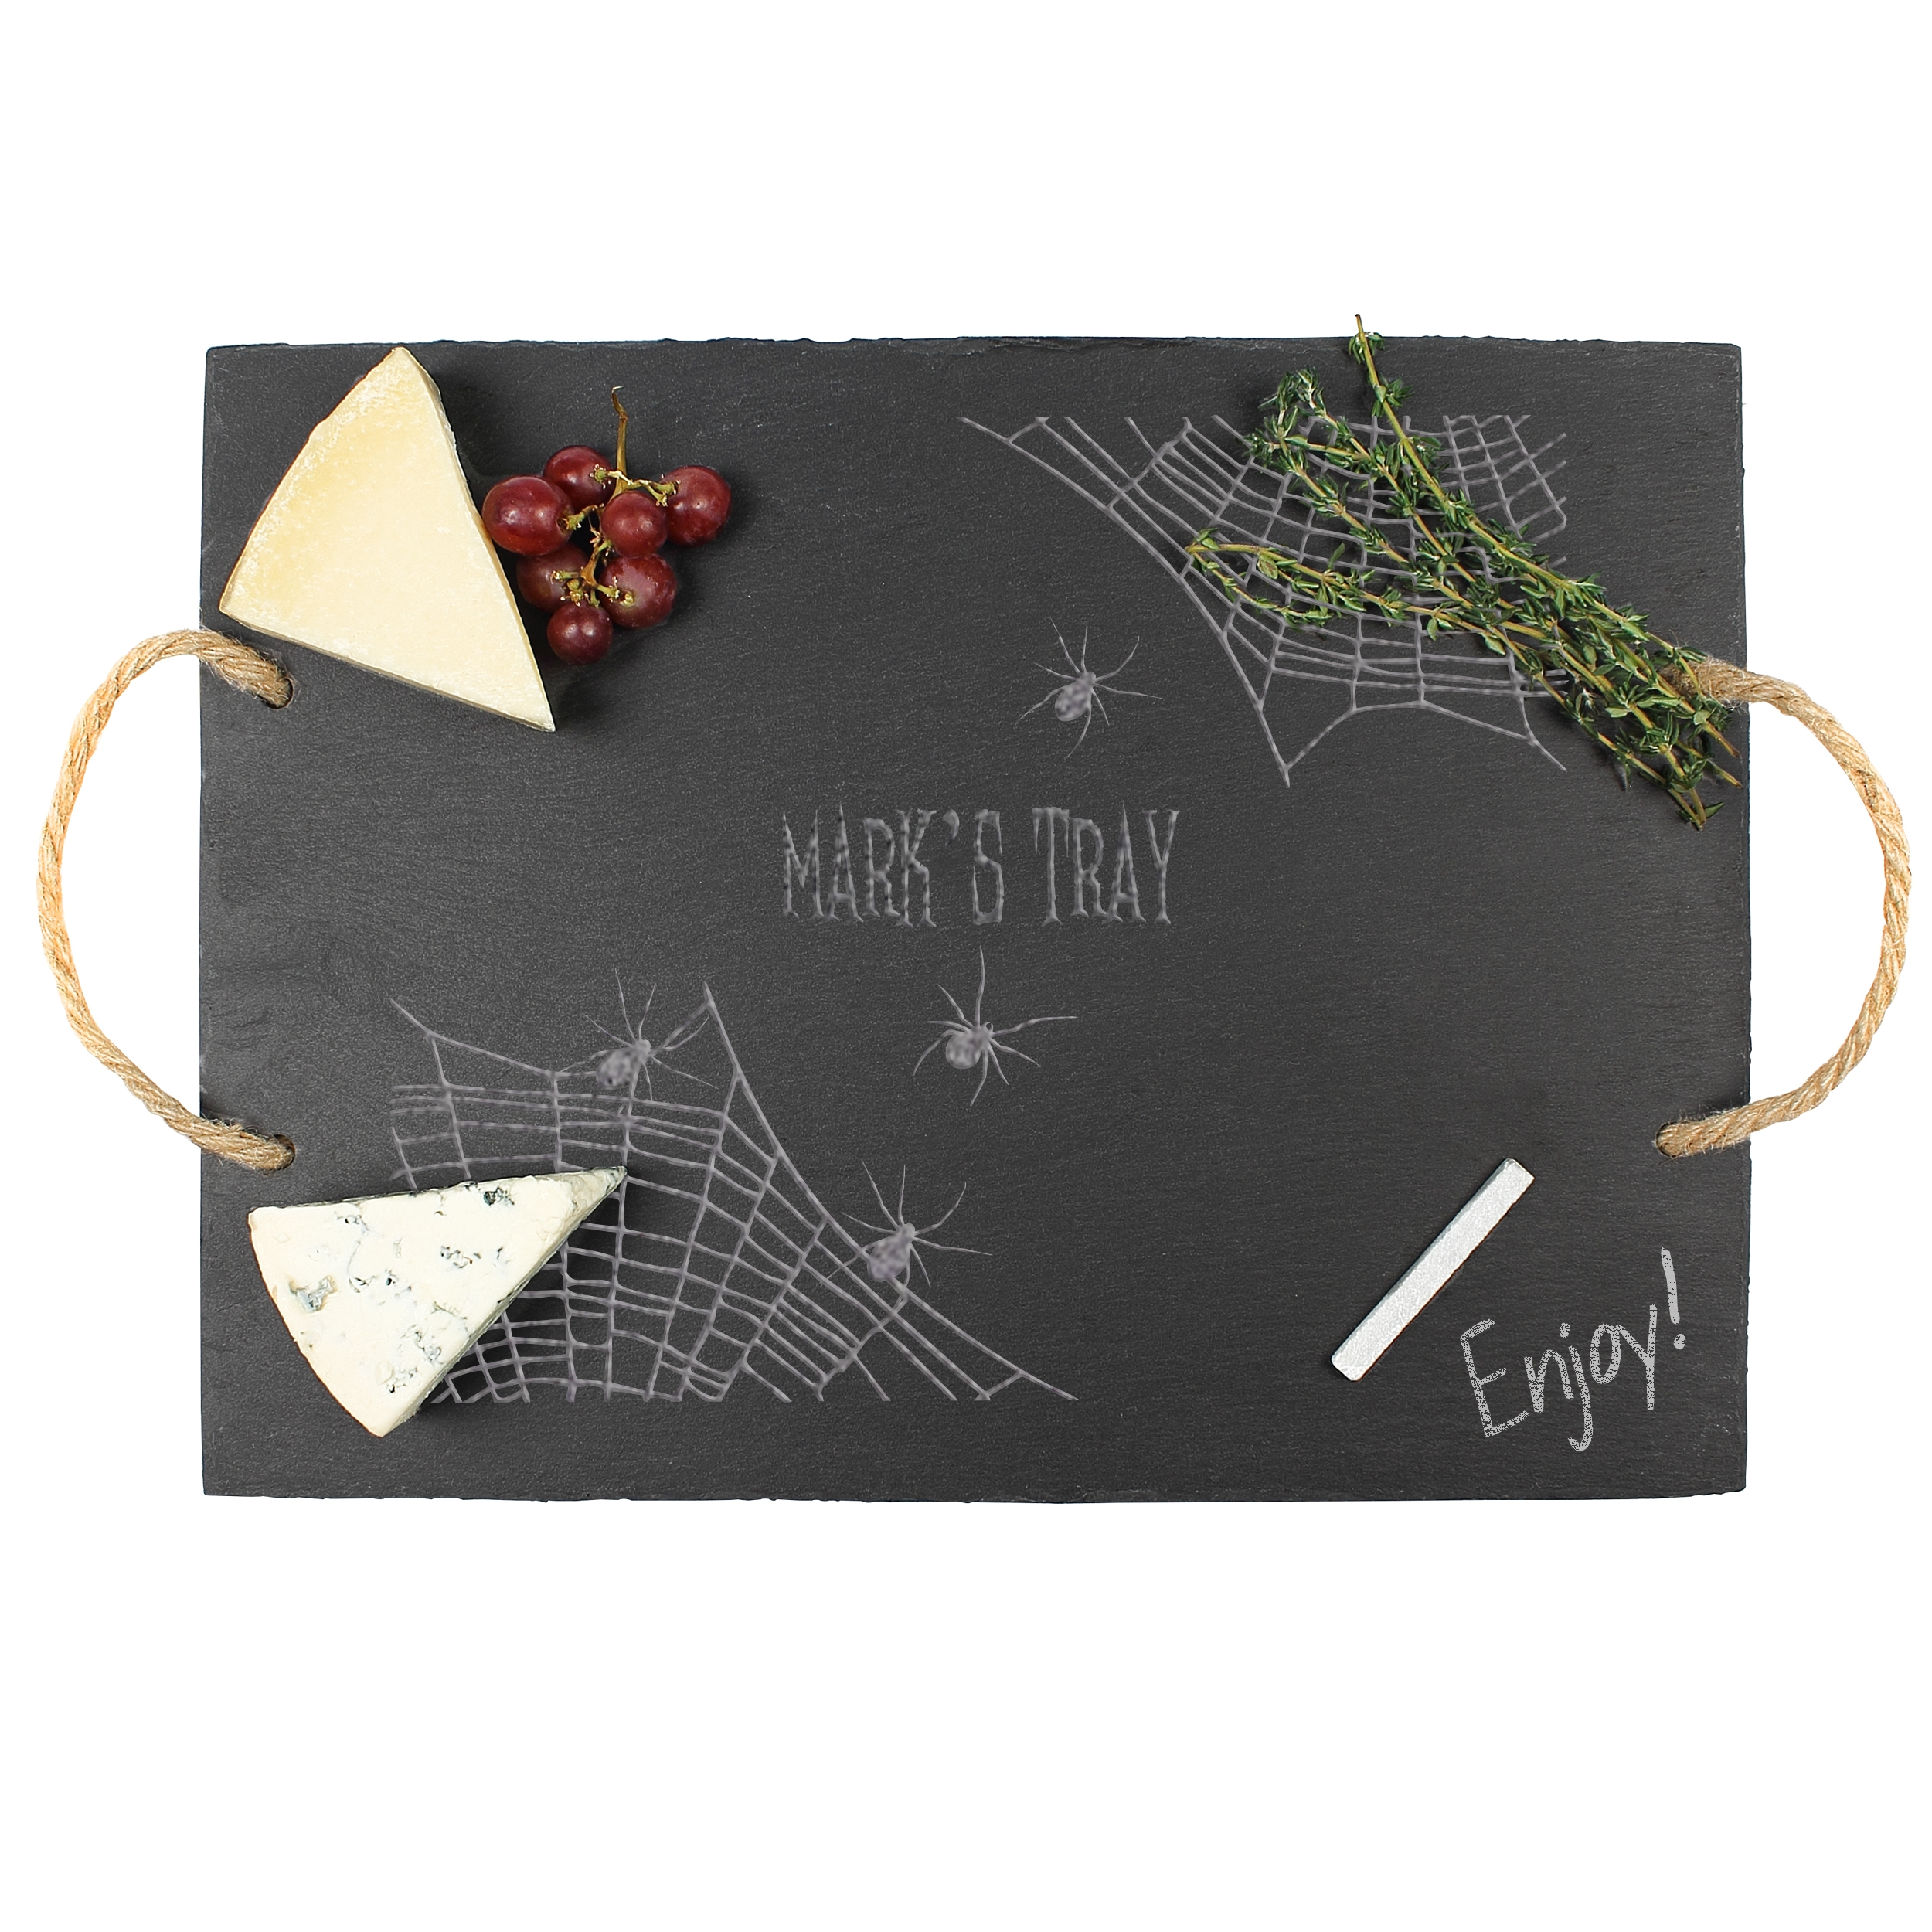 1. Cathy’s Concepts Spider Web Serving Tray, $109